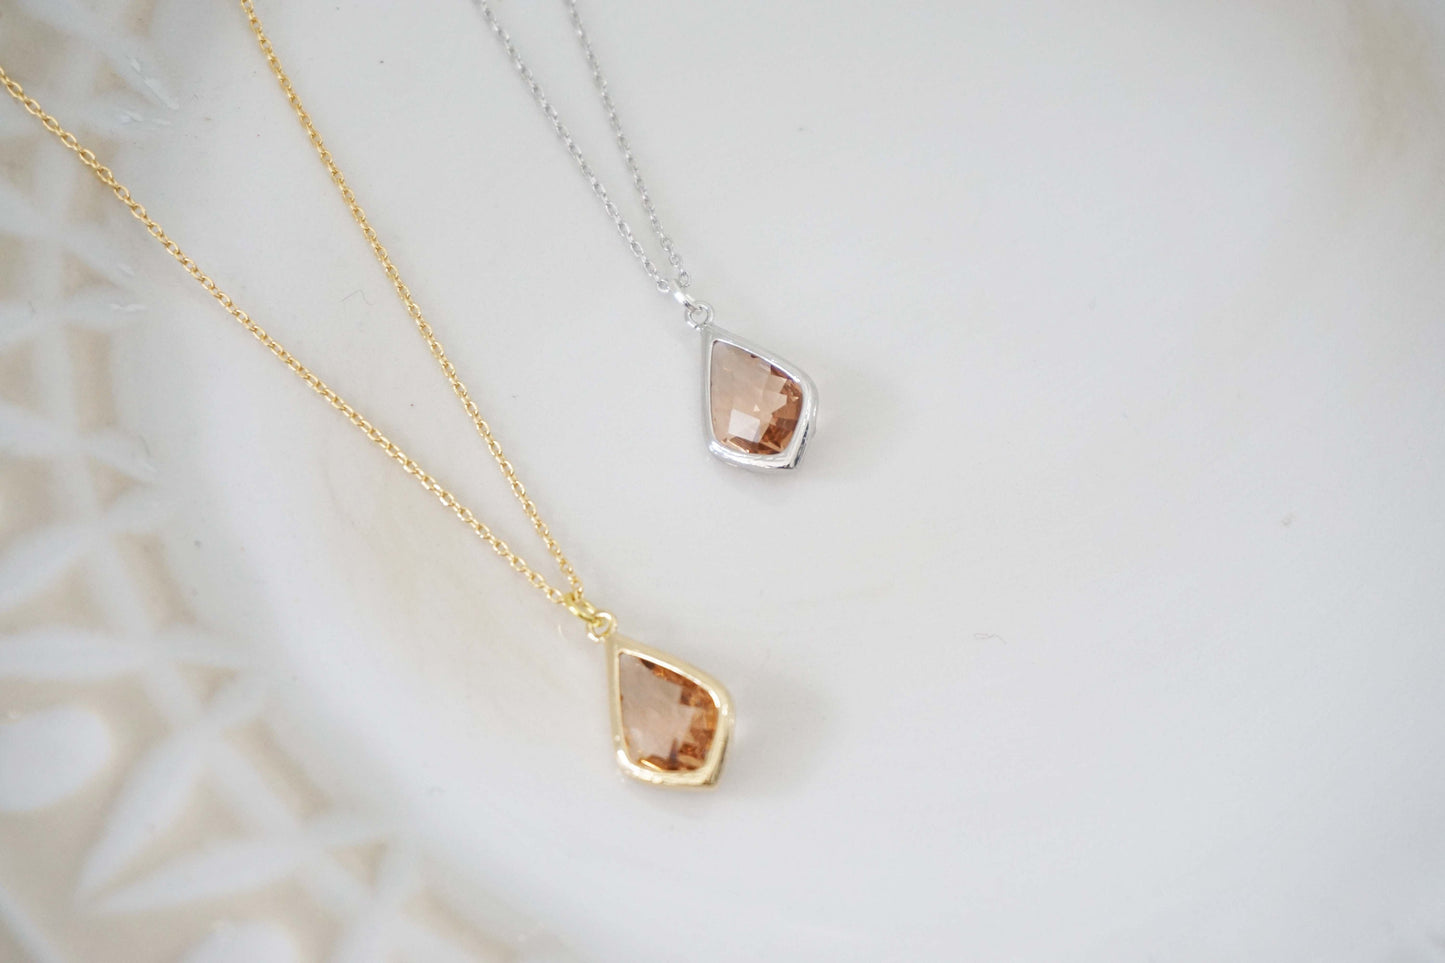 Champagne Gem Necklace | Bridesmaid Necklaces | Wedding Jewelry | NCHPG8, NCHPS8